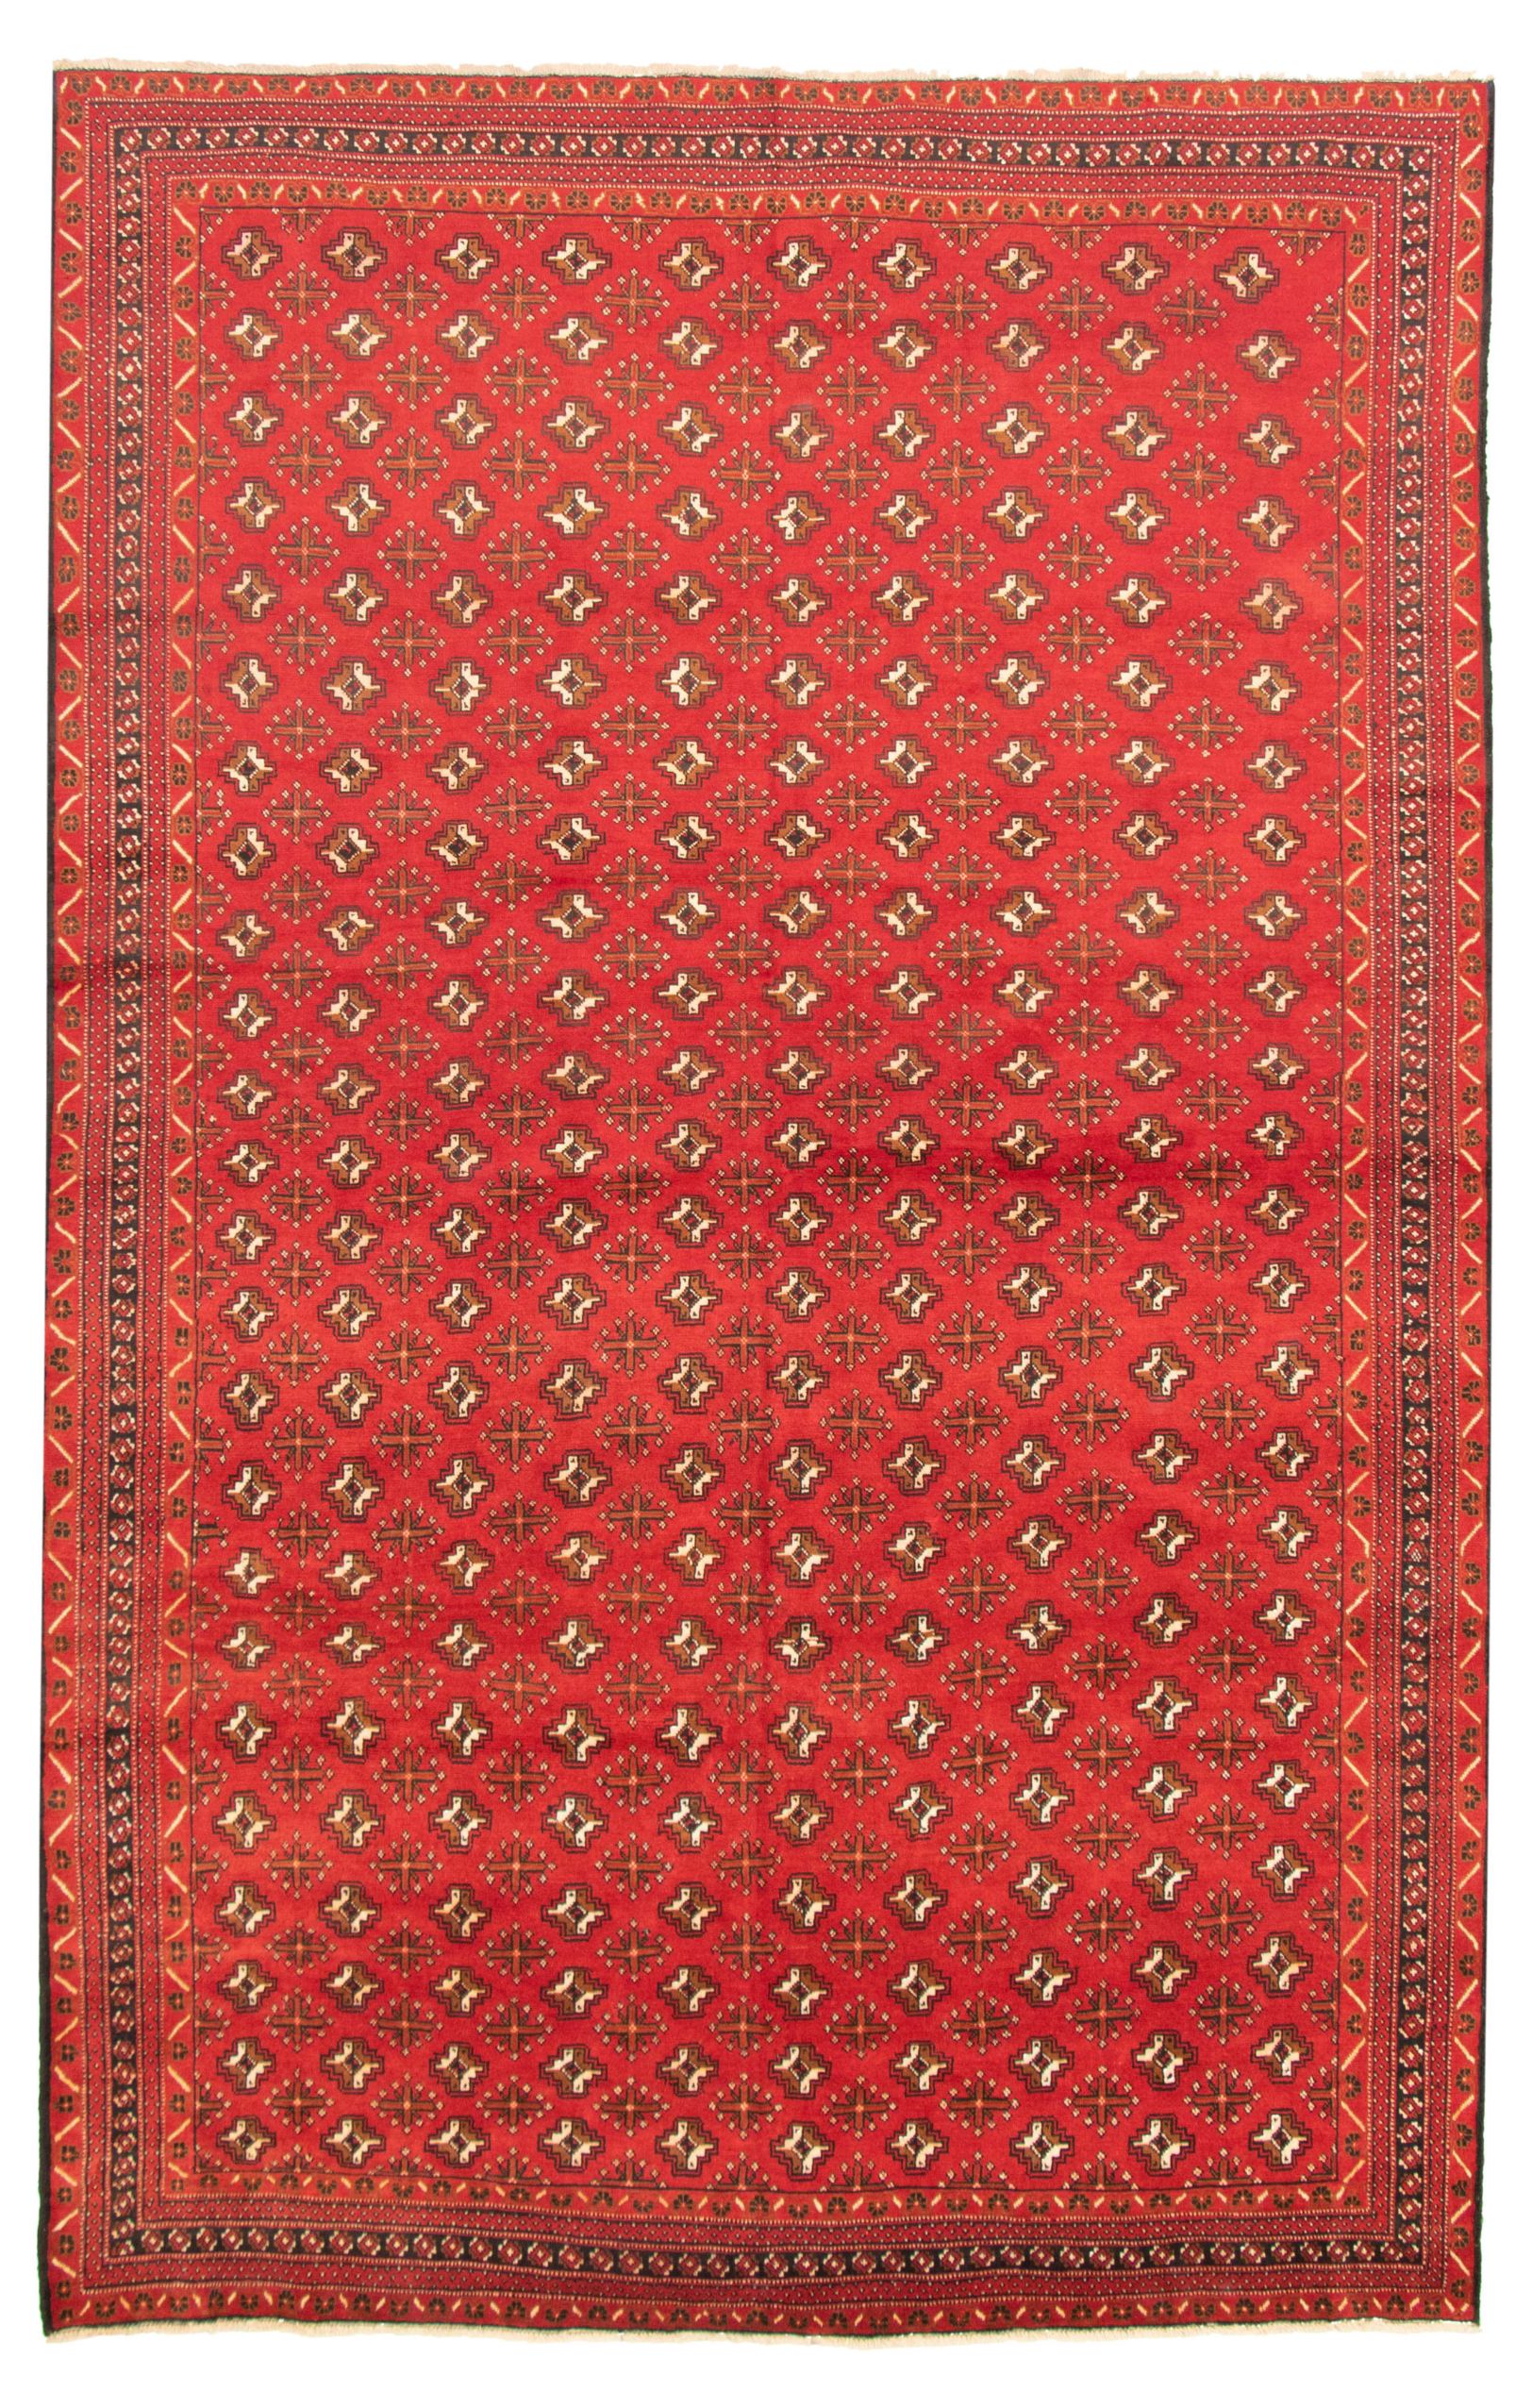 Hand-knotted Teimani Red Wool Rug 7'9" x 11'9" Size: 7'9" x 11'9"  